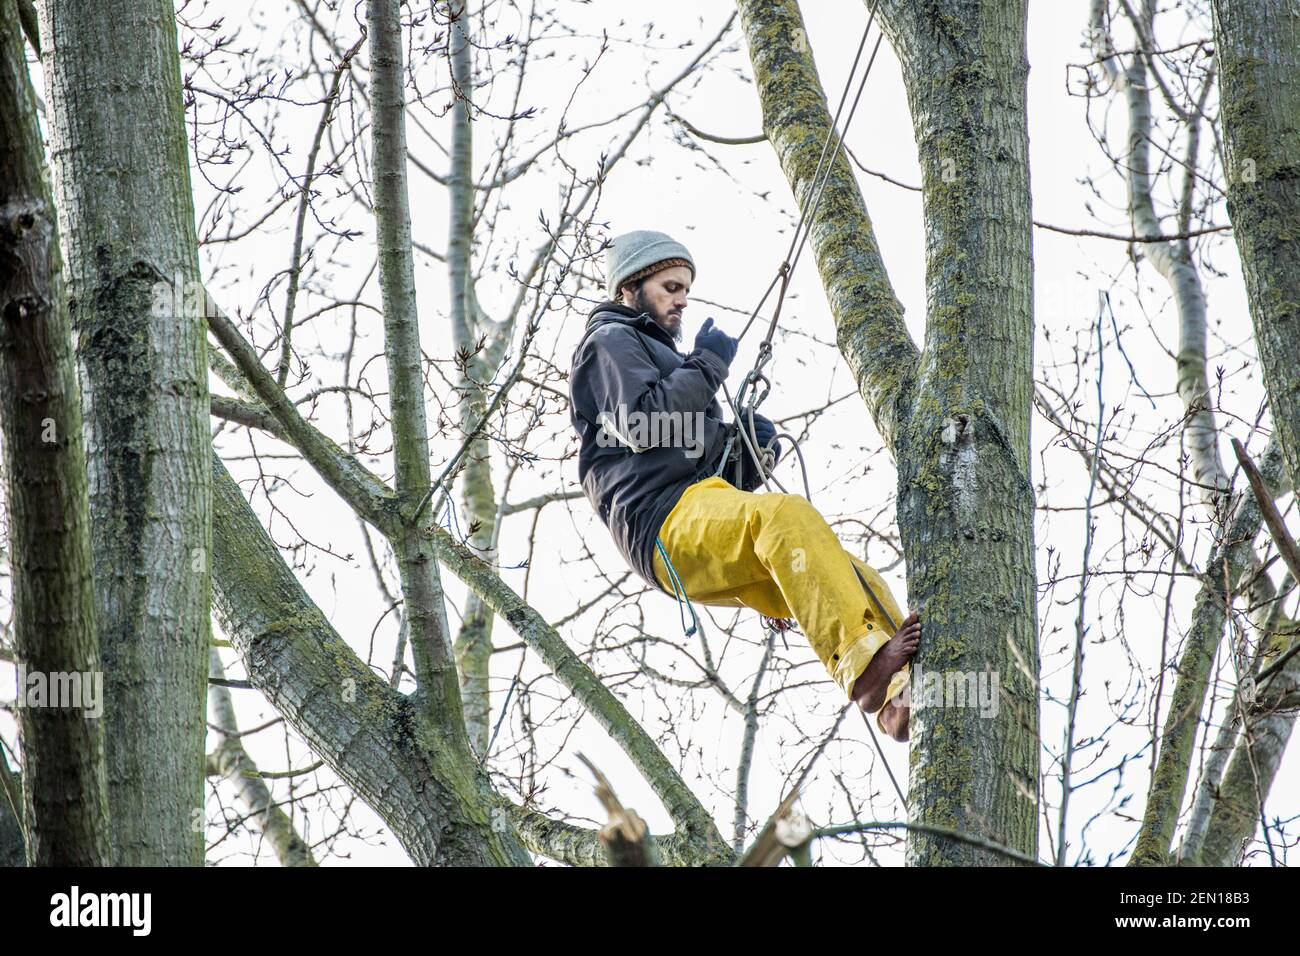 London, UK. 23rd Feb 2021. The environmental activist Marcus Carambola, 32, climbs up to check the status of a bird nest. It is the second day of “tree-sitting” at London’s York Gardens, Battersea, where three activists occupied a 100-year-old black poplar tree to save it from felling, during the night between 21st and 22nd of February. The tree was due for cutting down to make way for a new electric cable, part of the local housing regeneration scheme by the council and Taylor Wimpey Homes. Usually the presence of active bird nests is sufficient reason to stop or delay tree fellings. Stock Photo